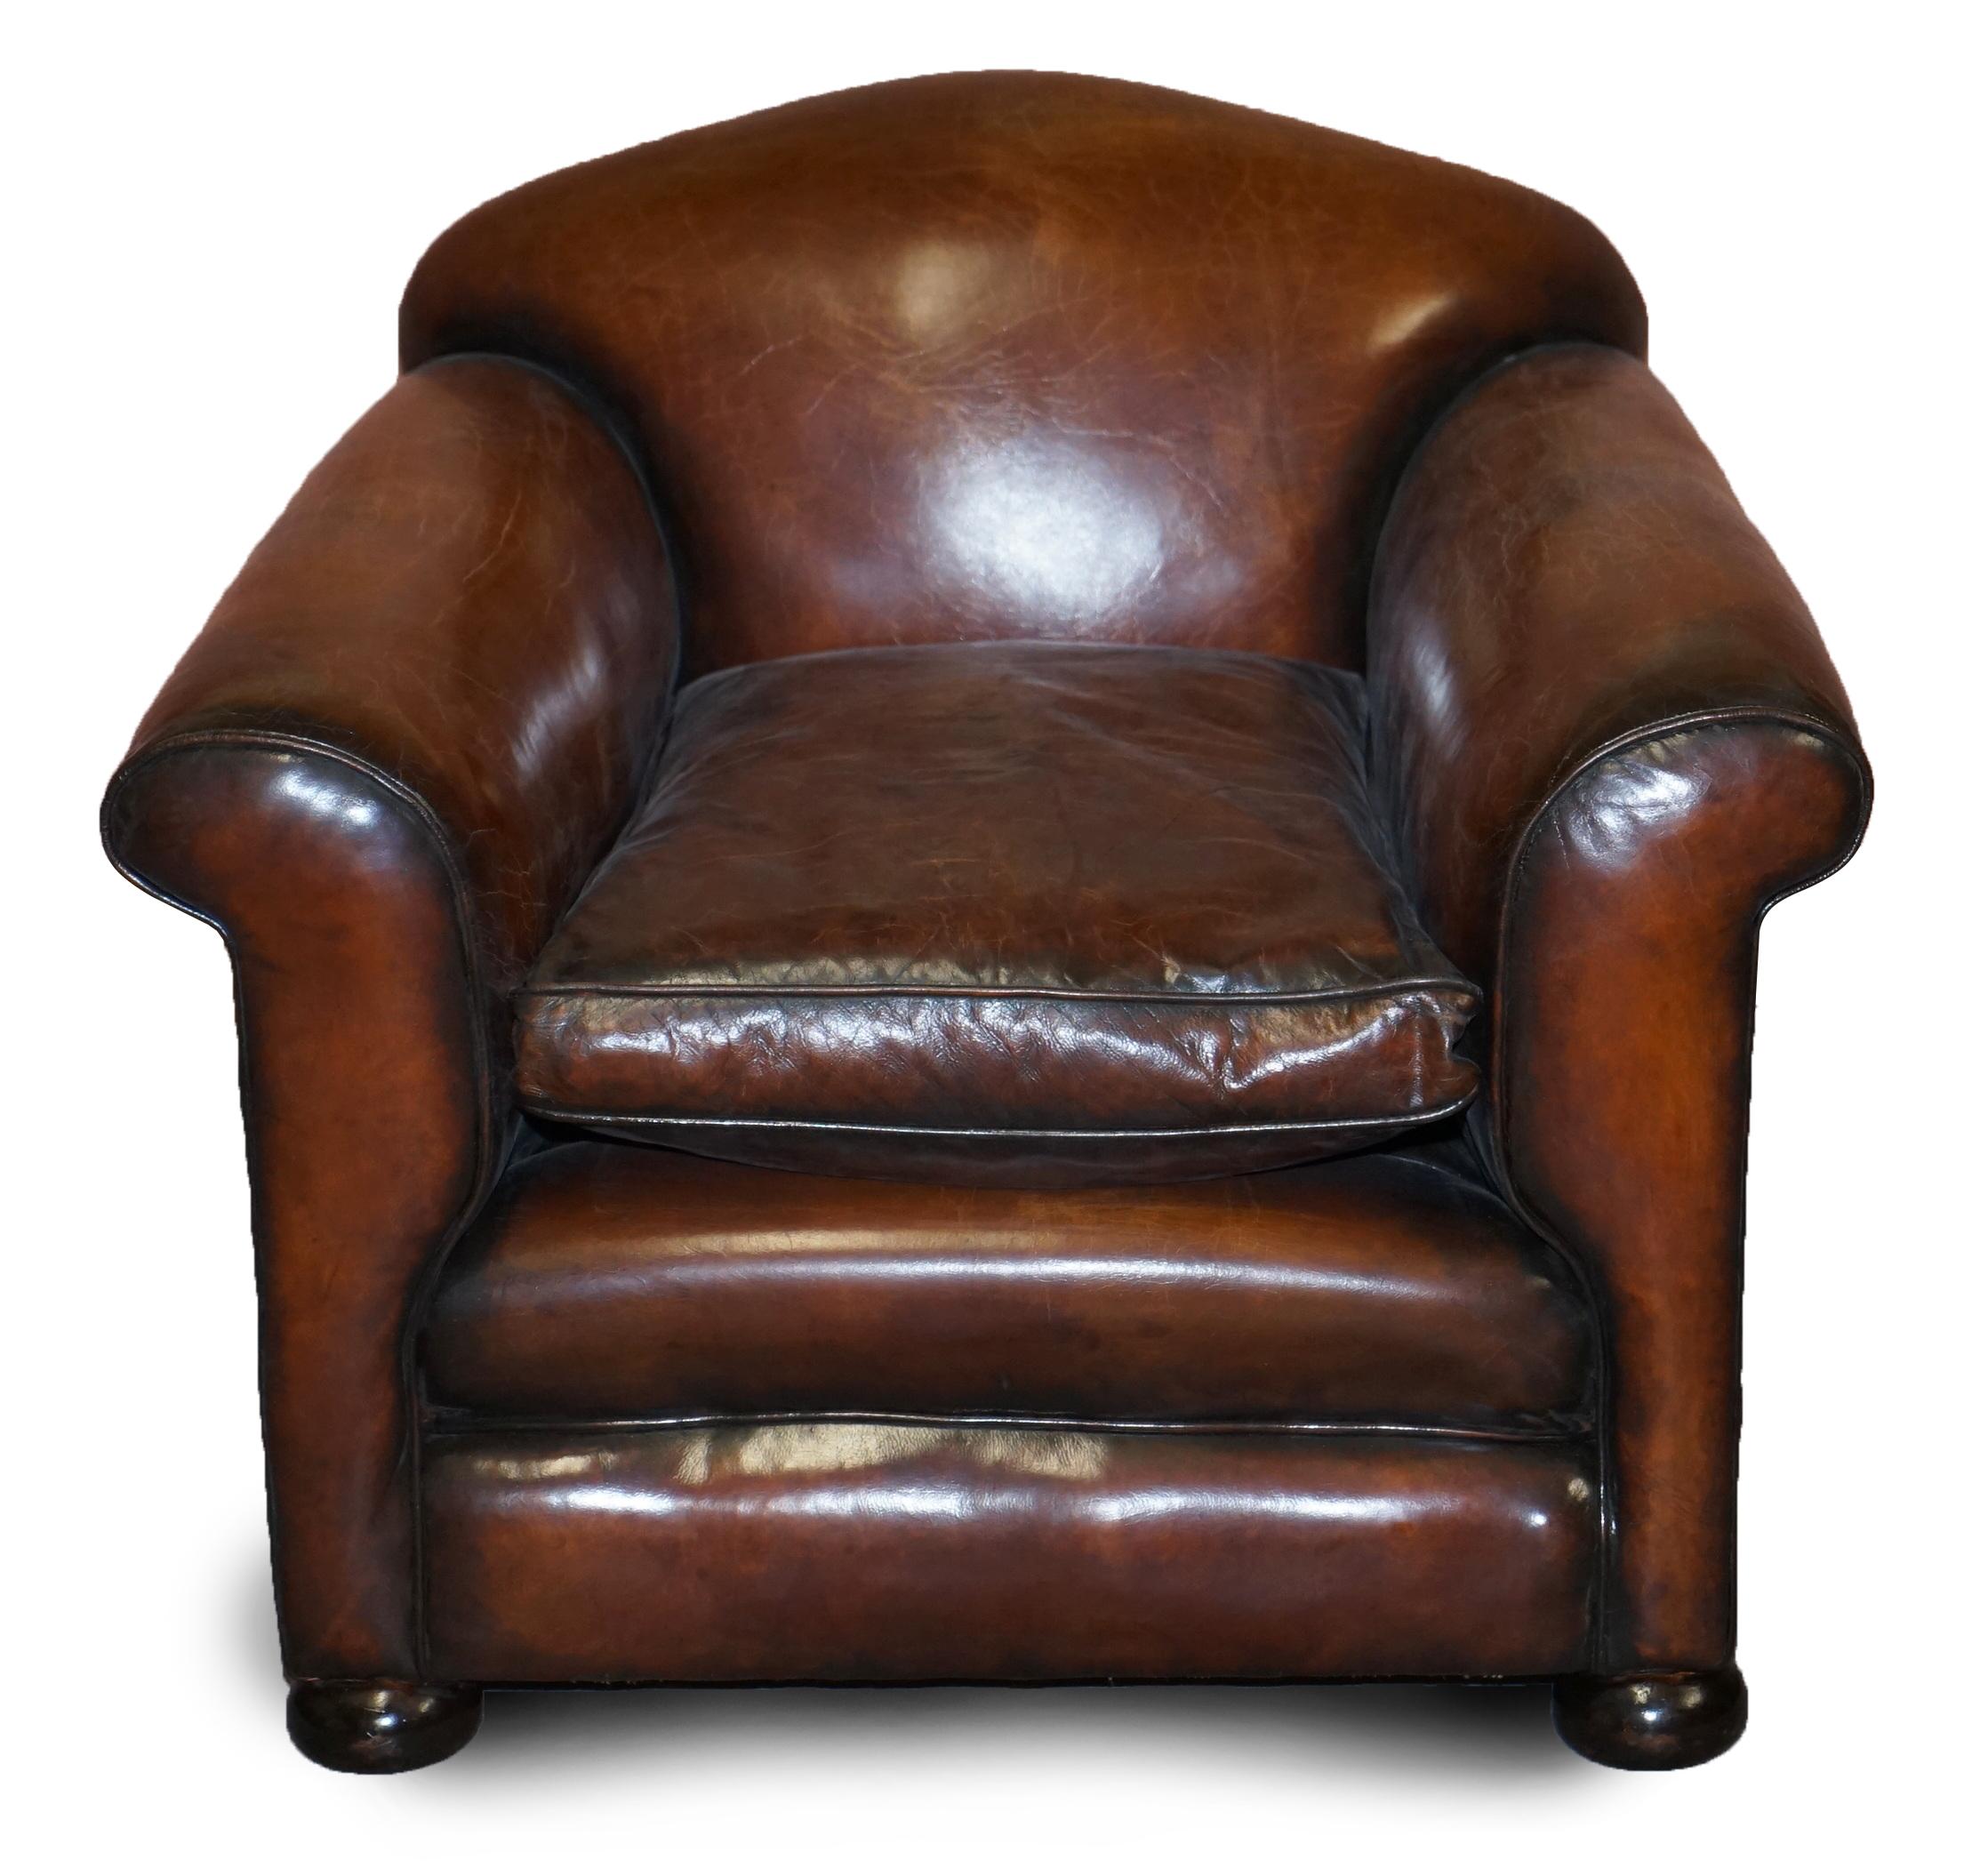 English Sublime Pair of Victorian Fully Restored Chestnut Brown Leather Club Armchairs